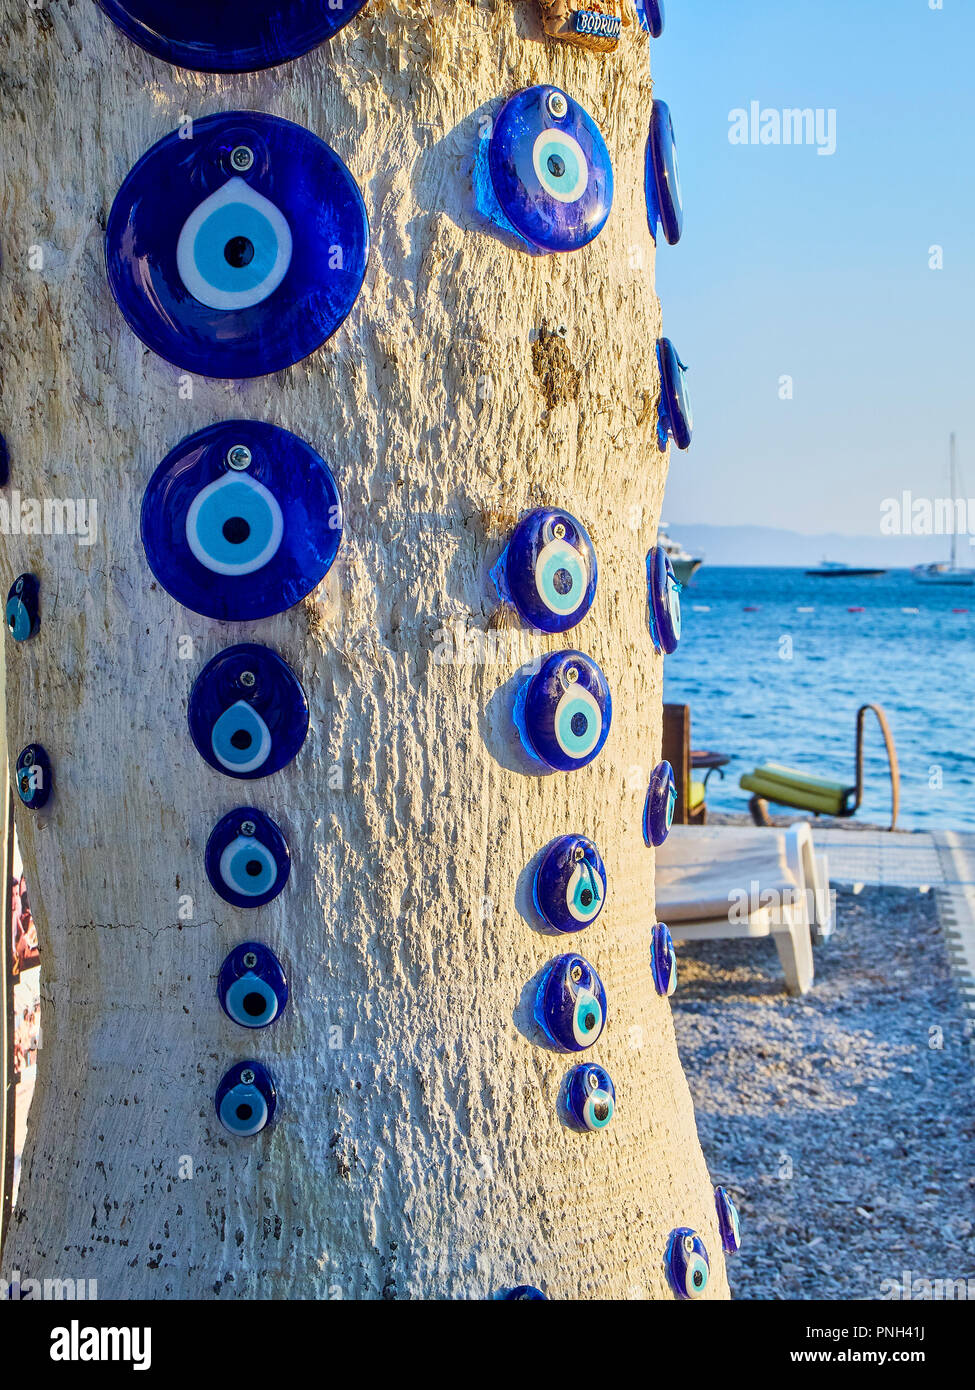 A lot of Nazar boncugu, a Turkish eye-shaped amulet screwed to a tree with the Aegean Sea in the background. Stock Photo